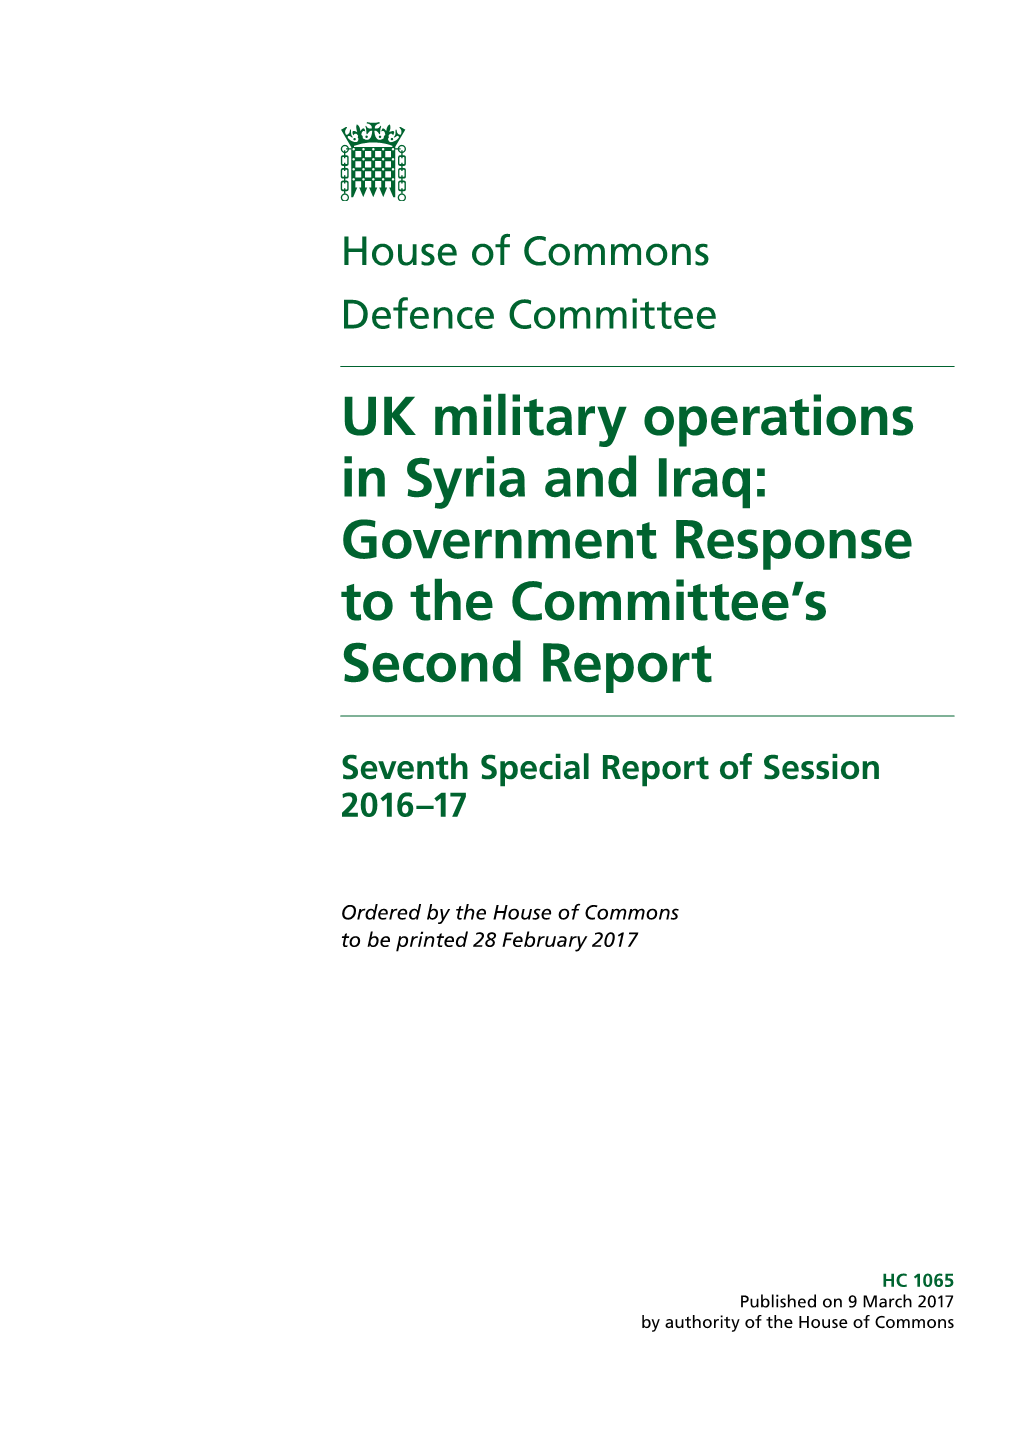 UK Military Operations in Syria and Iraq: Government Response to the Committee’S Second Report